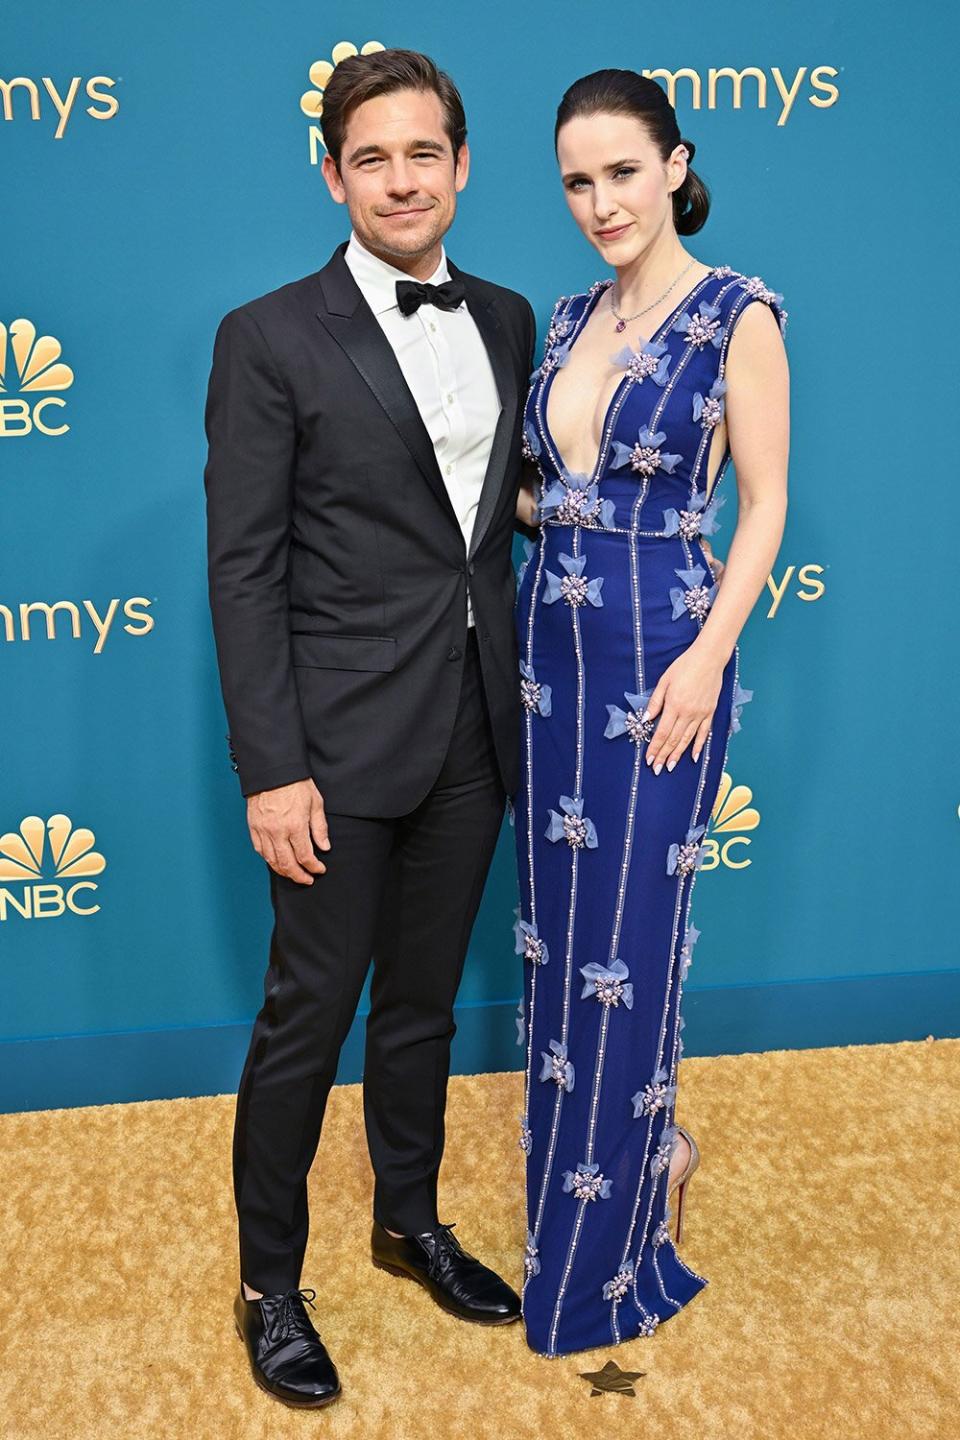 Mandatory Credit: Photo by Rob Latour/Shutterstock for PEOPLE (13385927ct) Jason Ralph and Rachel Brosnahan 74th Primetime Emmy Awards, Arrivals, Microsoft Theater, Los Angeles, USA - 12 Sep 2022